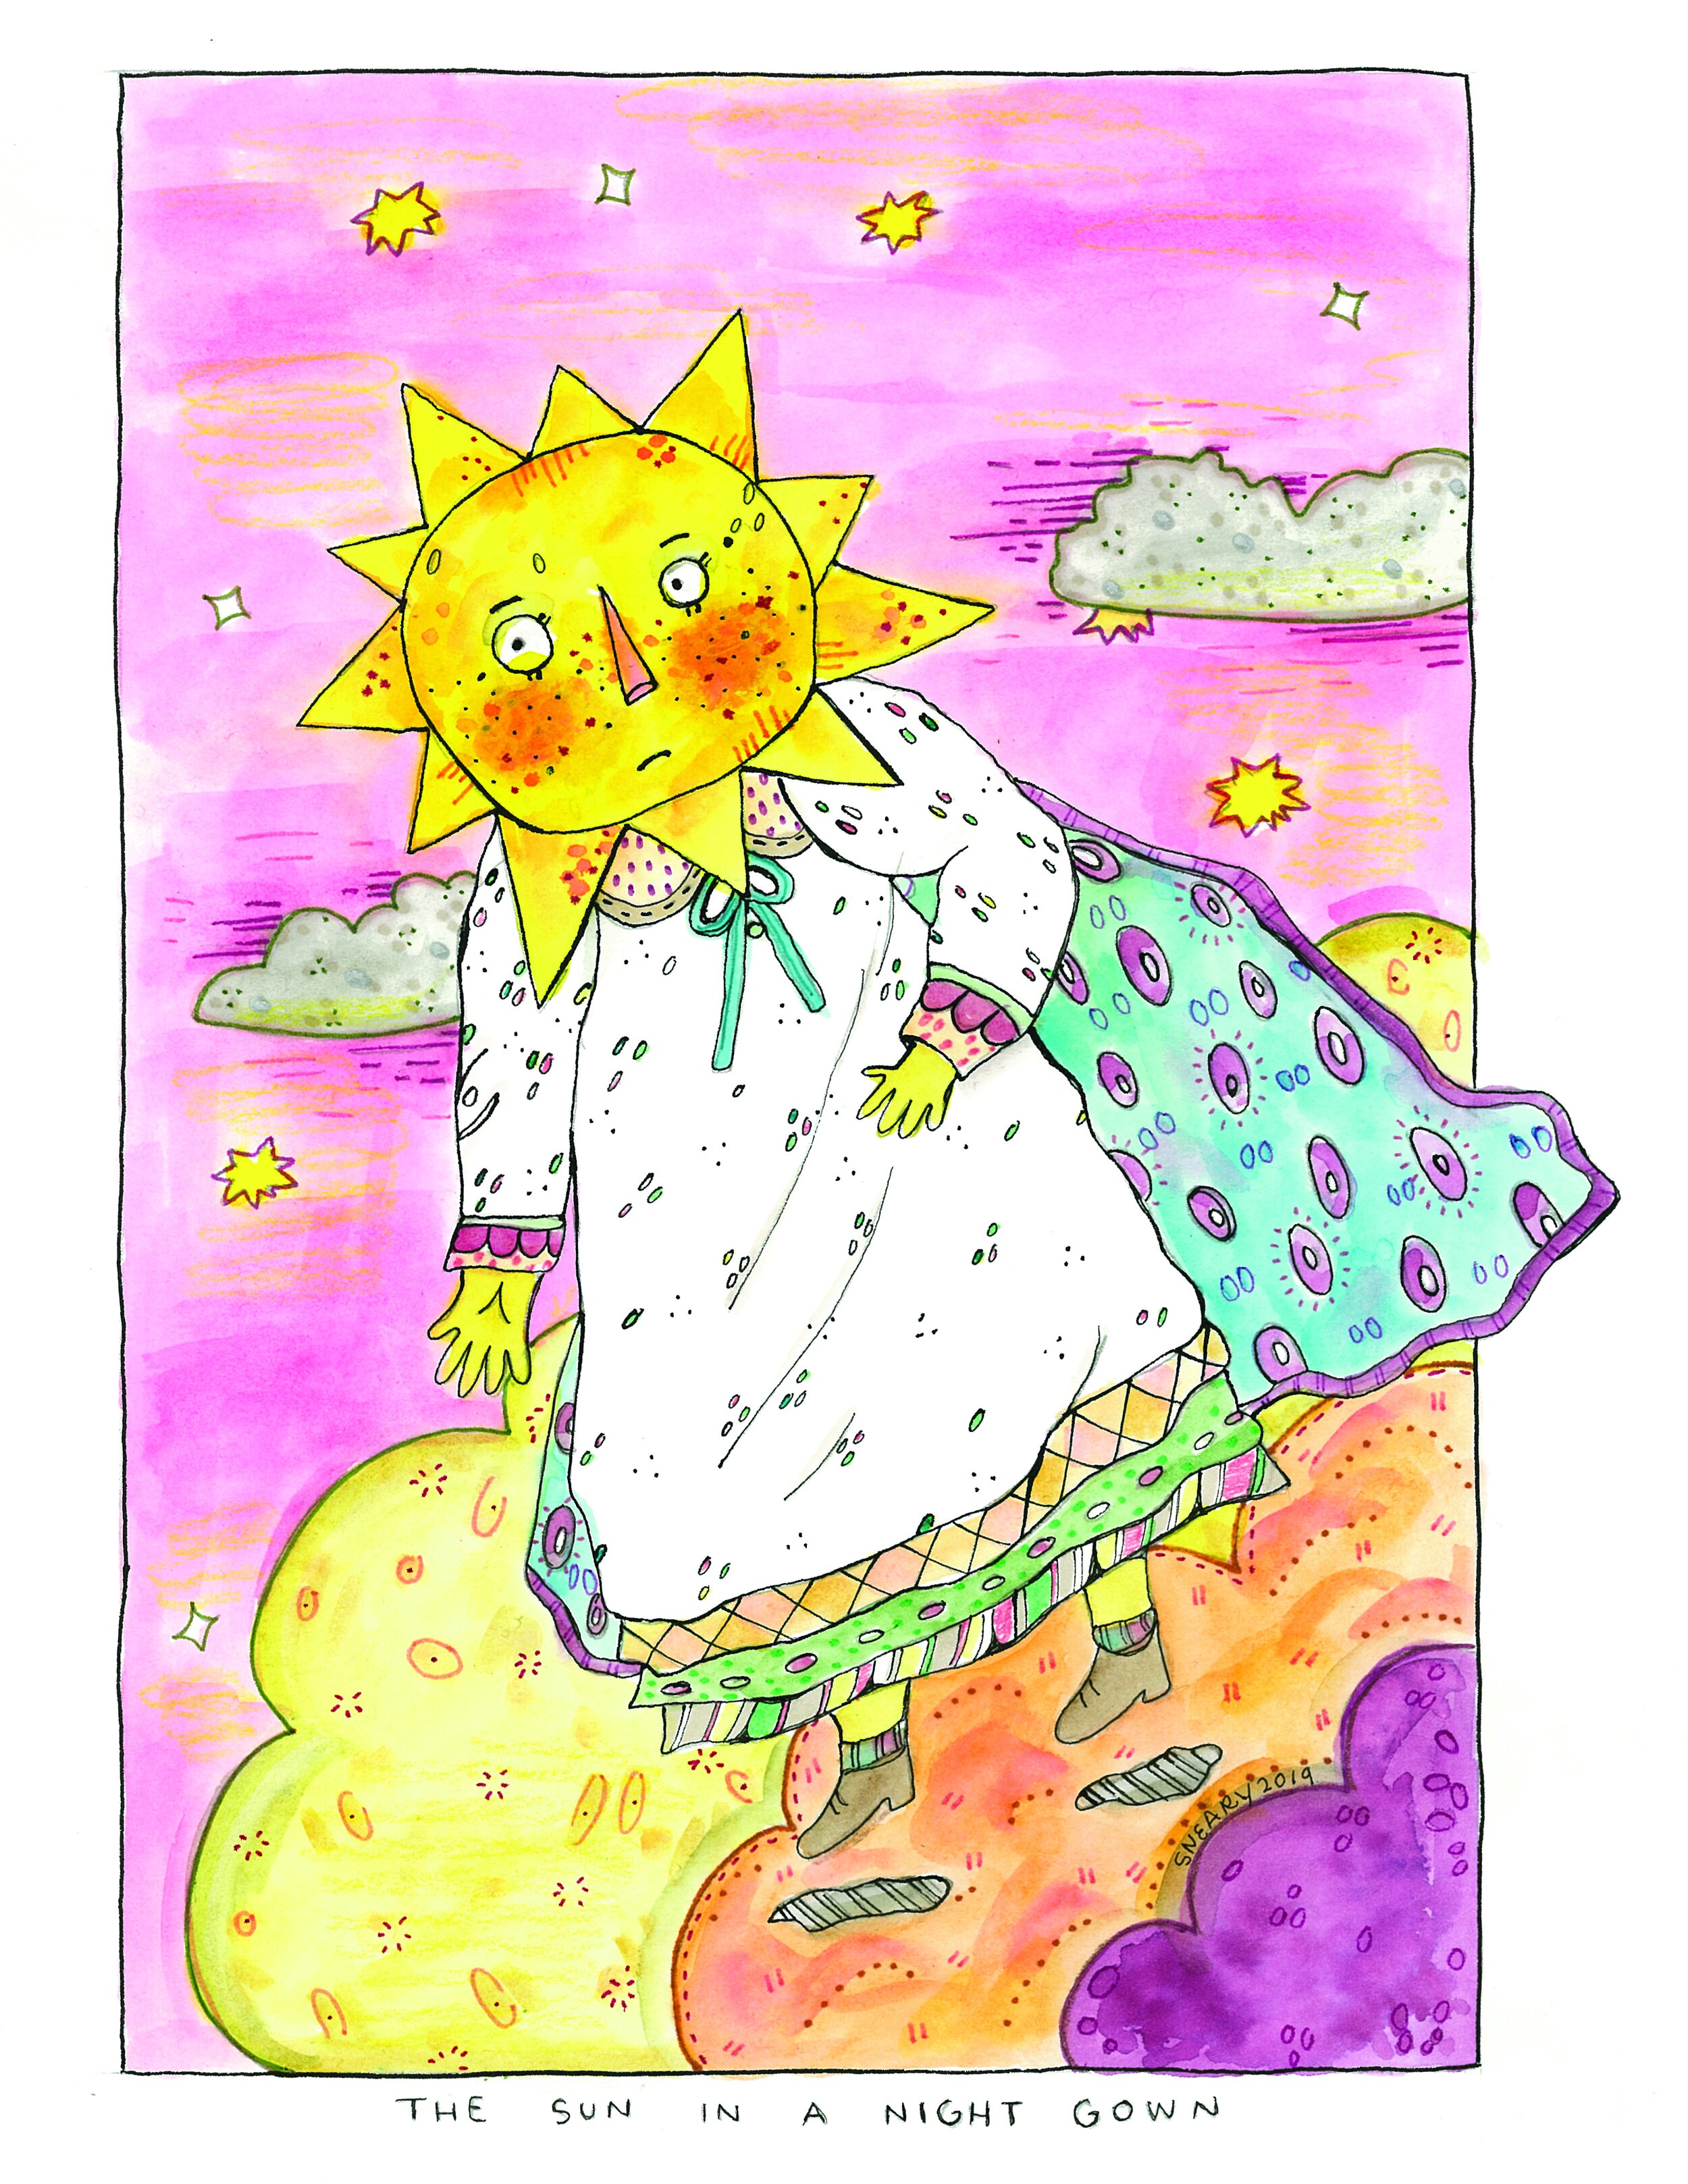 "The Sun in a Night Gown"